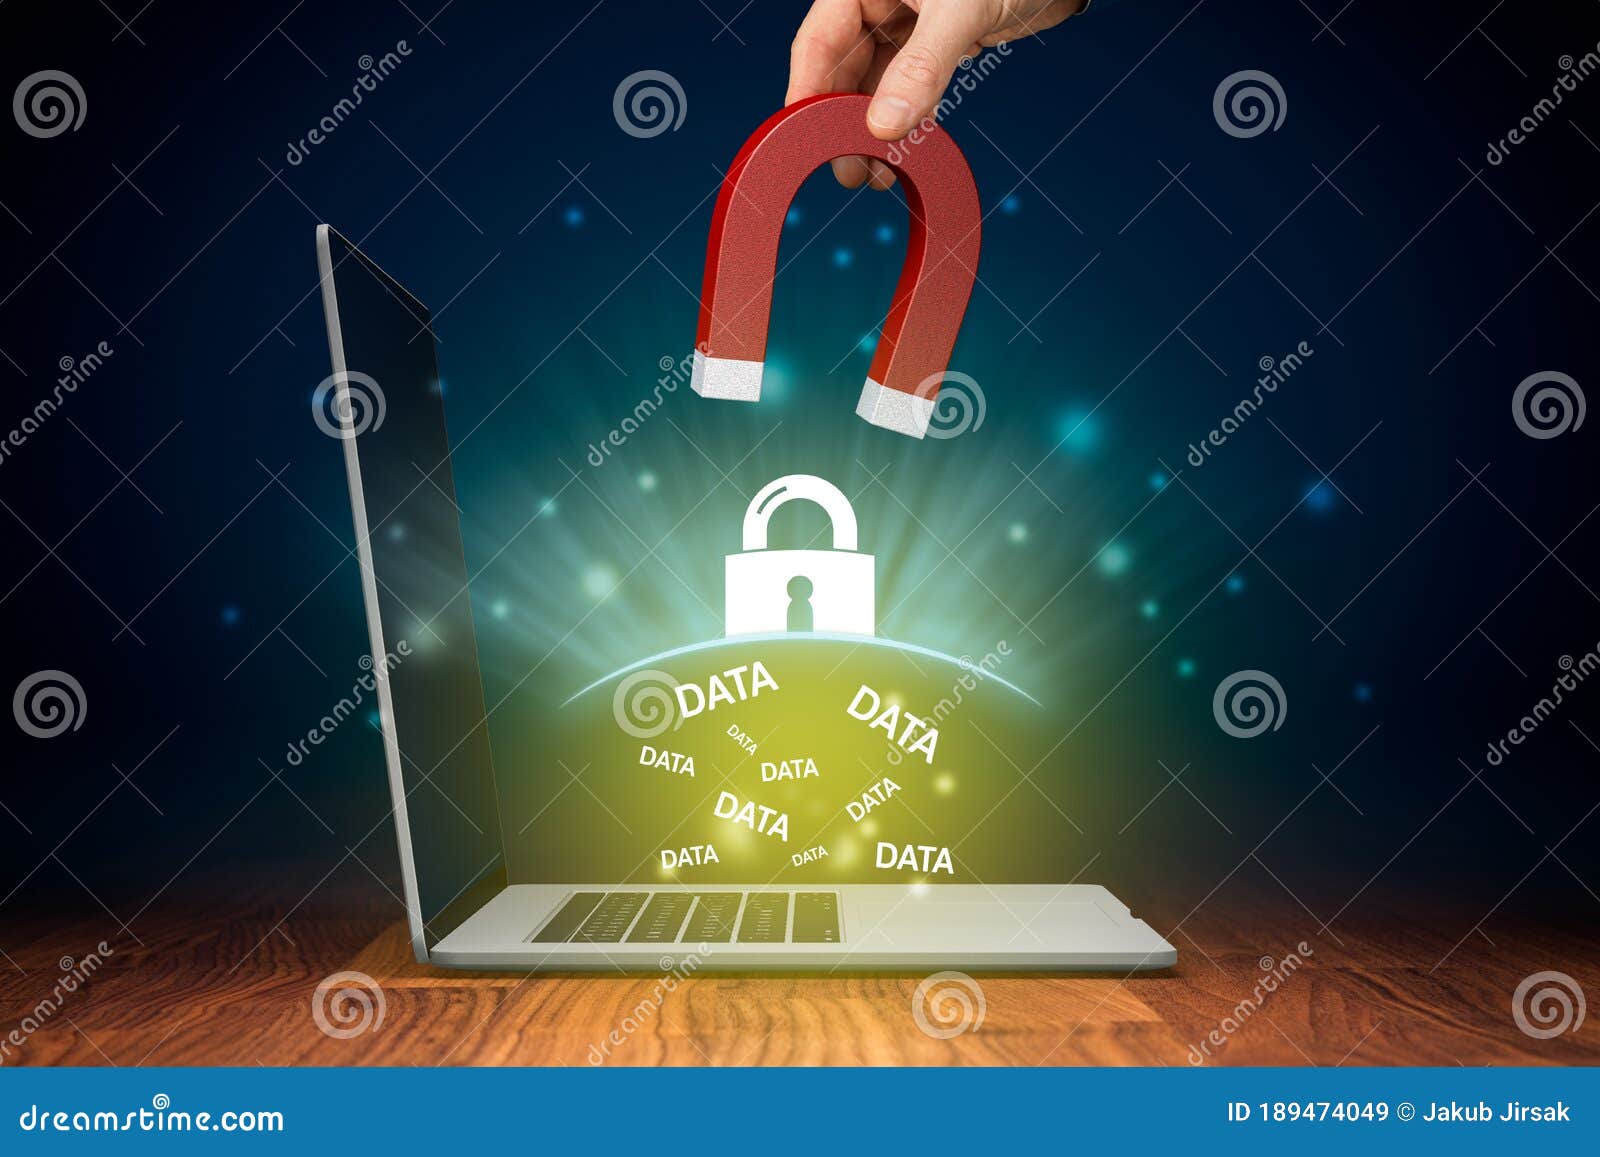 computer data protection and cyber security concept